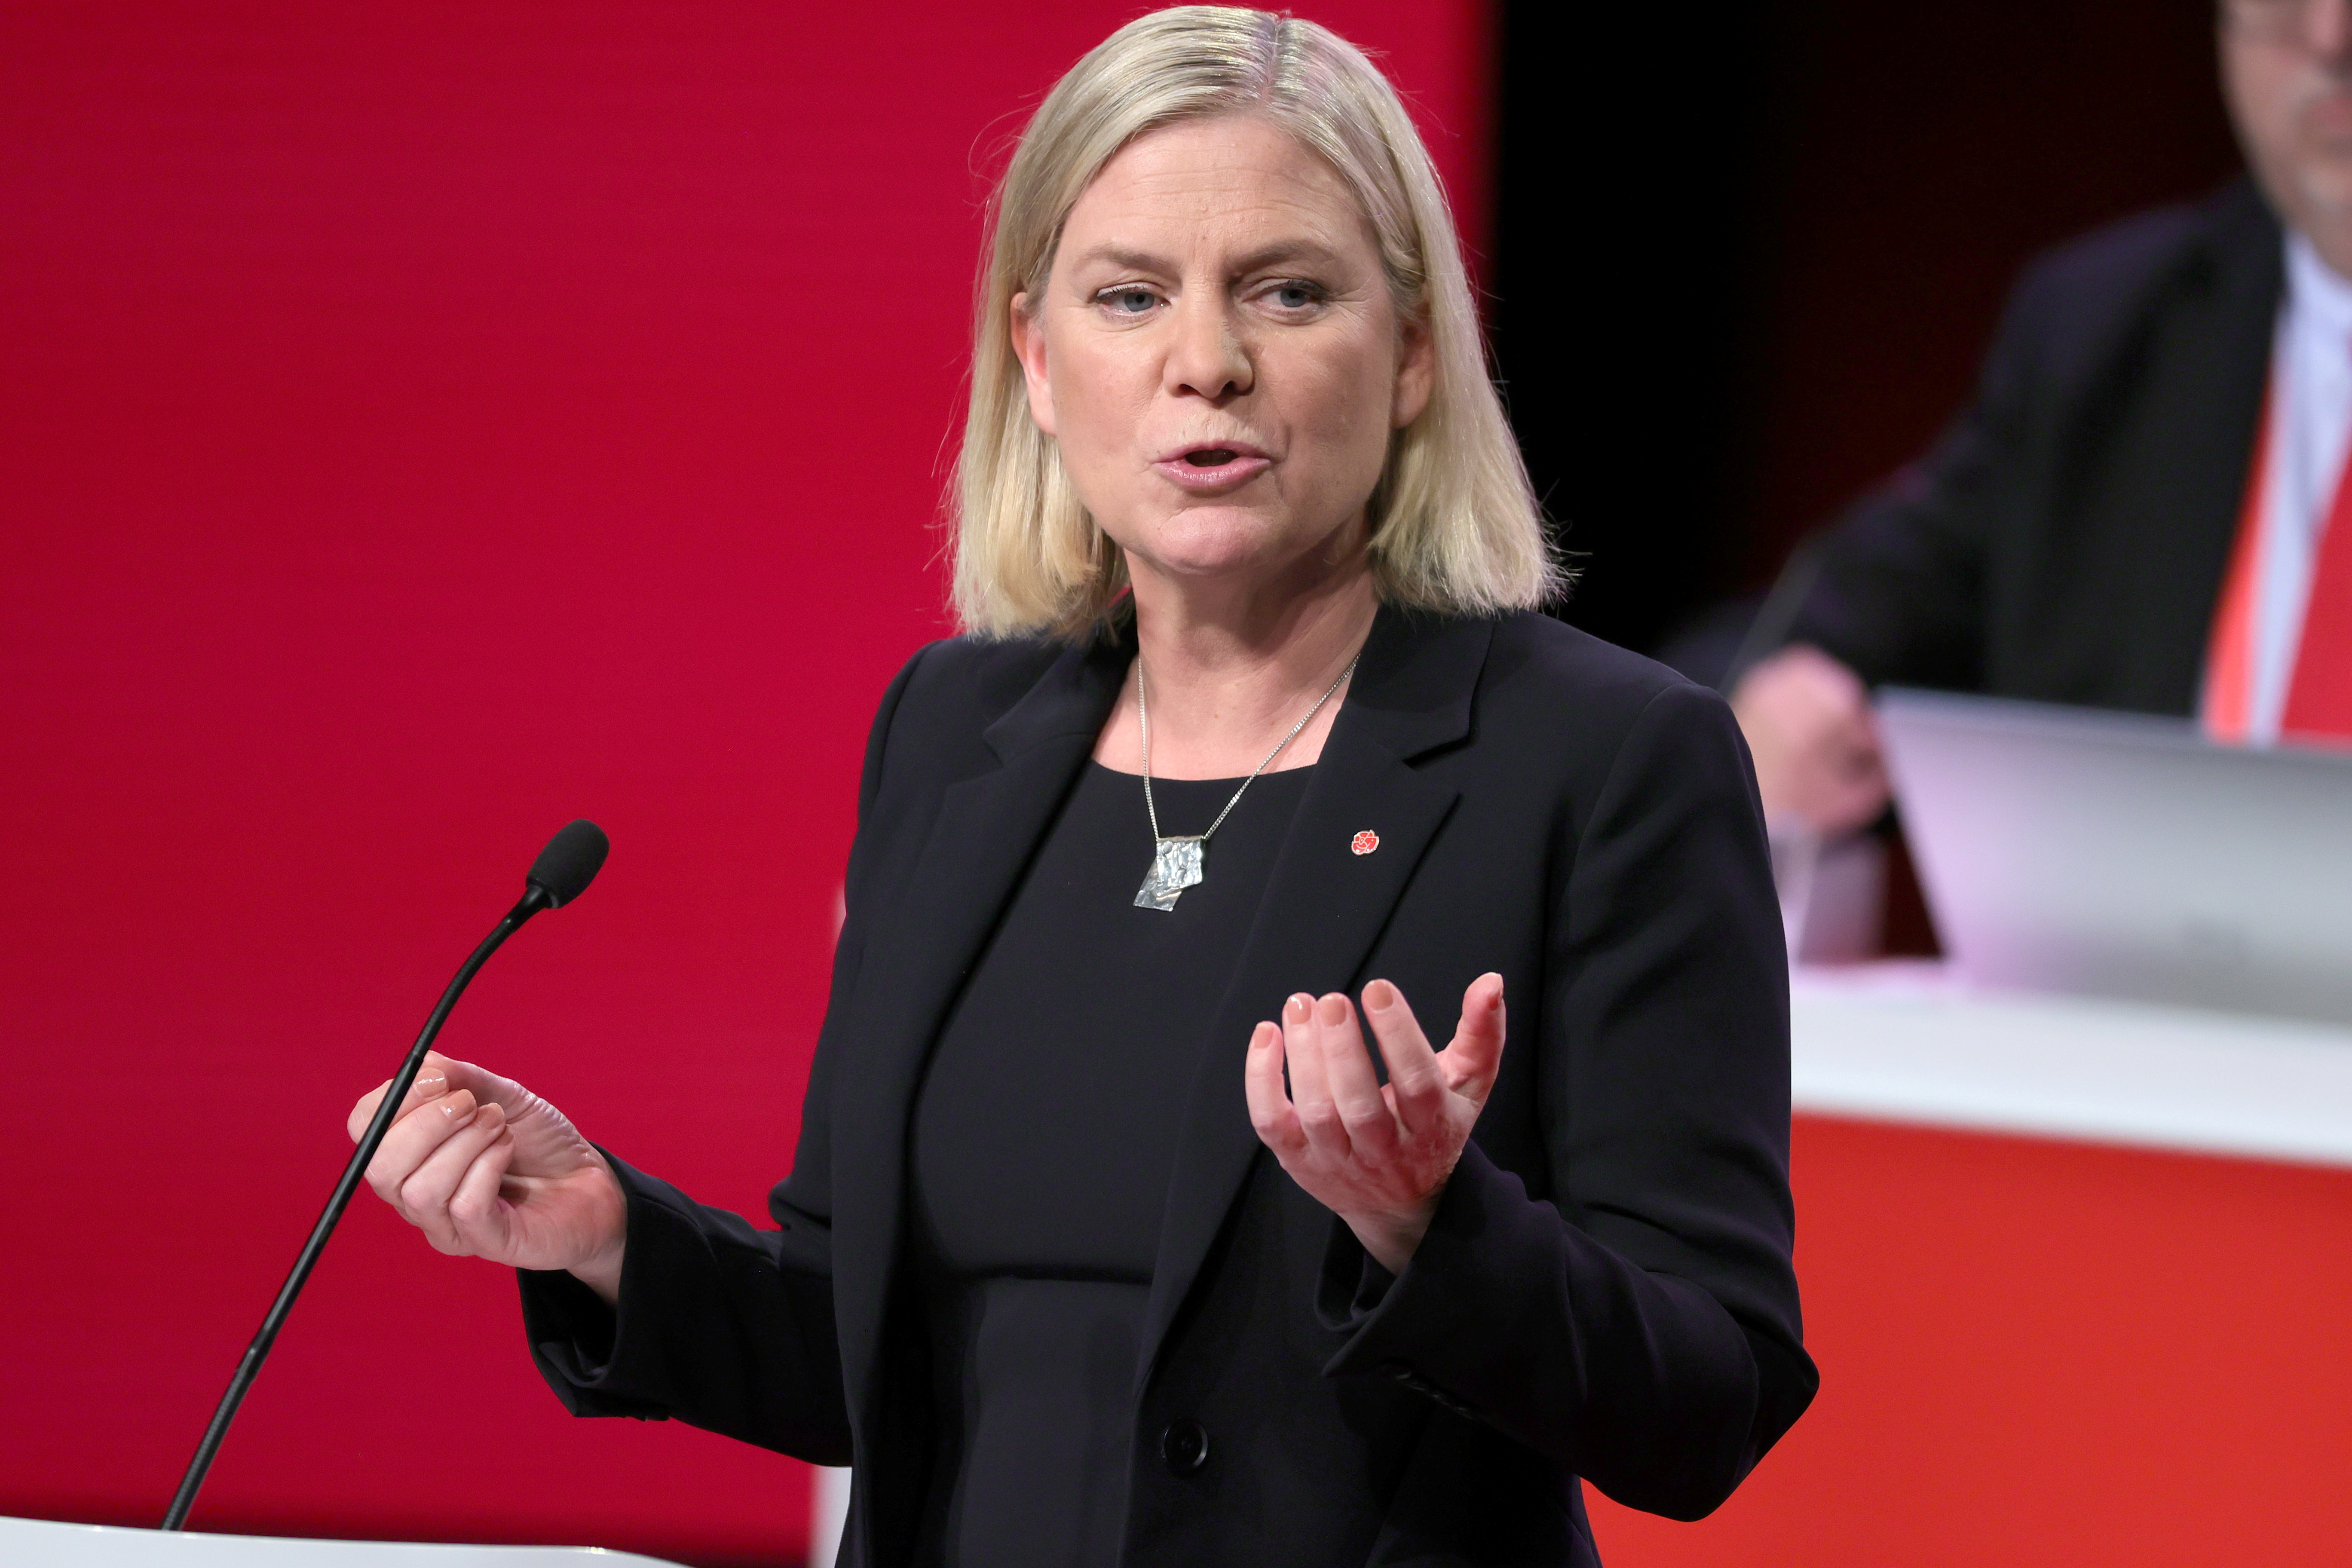 Sweden's Minister of Finance Magdalena Andersson gives a speech after being elected party leader of the Social Democratic Party at the party's congress, in Gothenburg, Sweden, on November 4, 2021. Adam Ihse / TT News Agency via REUTERS / File Photo